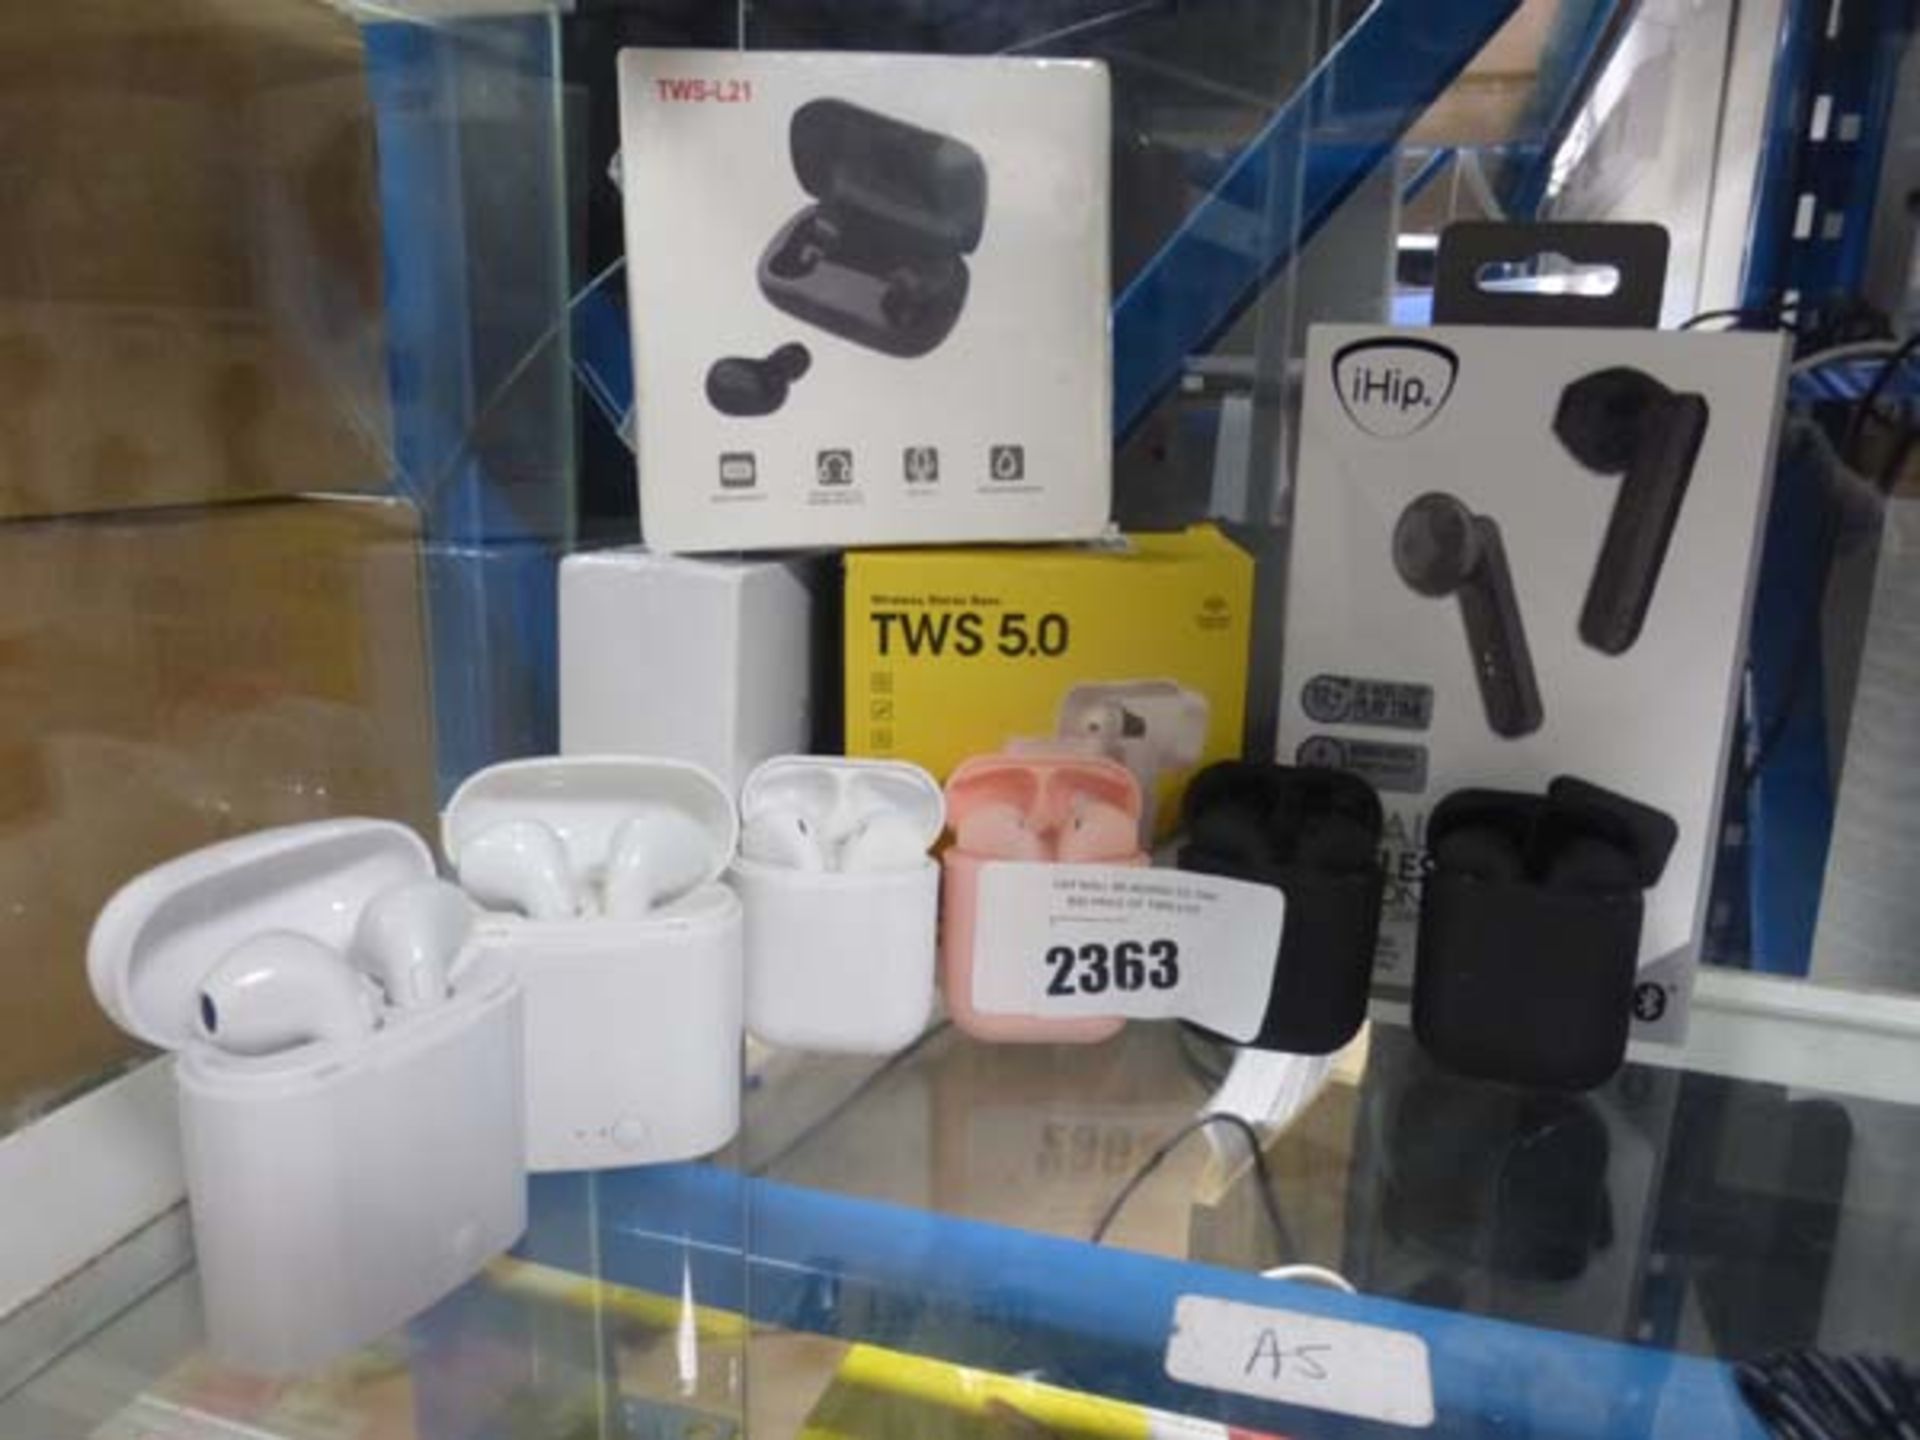 Approximately 10 various wireless earphone sets (some boxed)